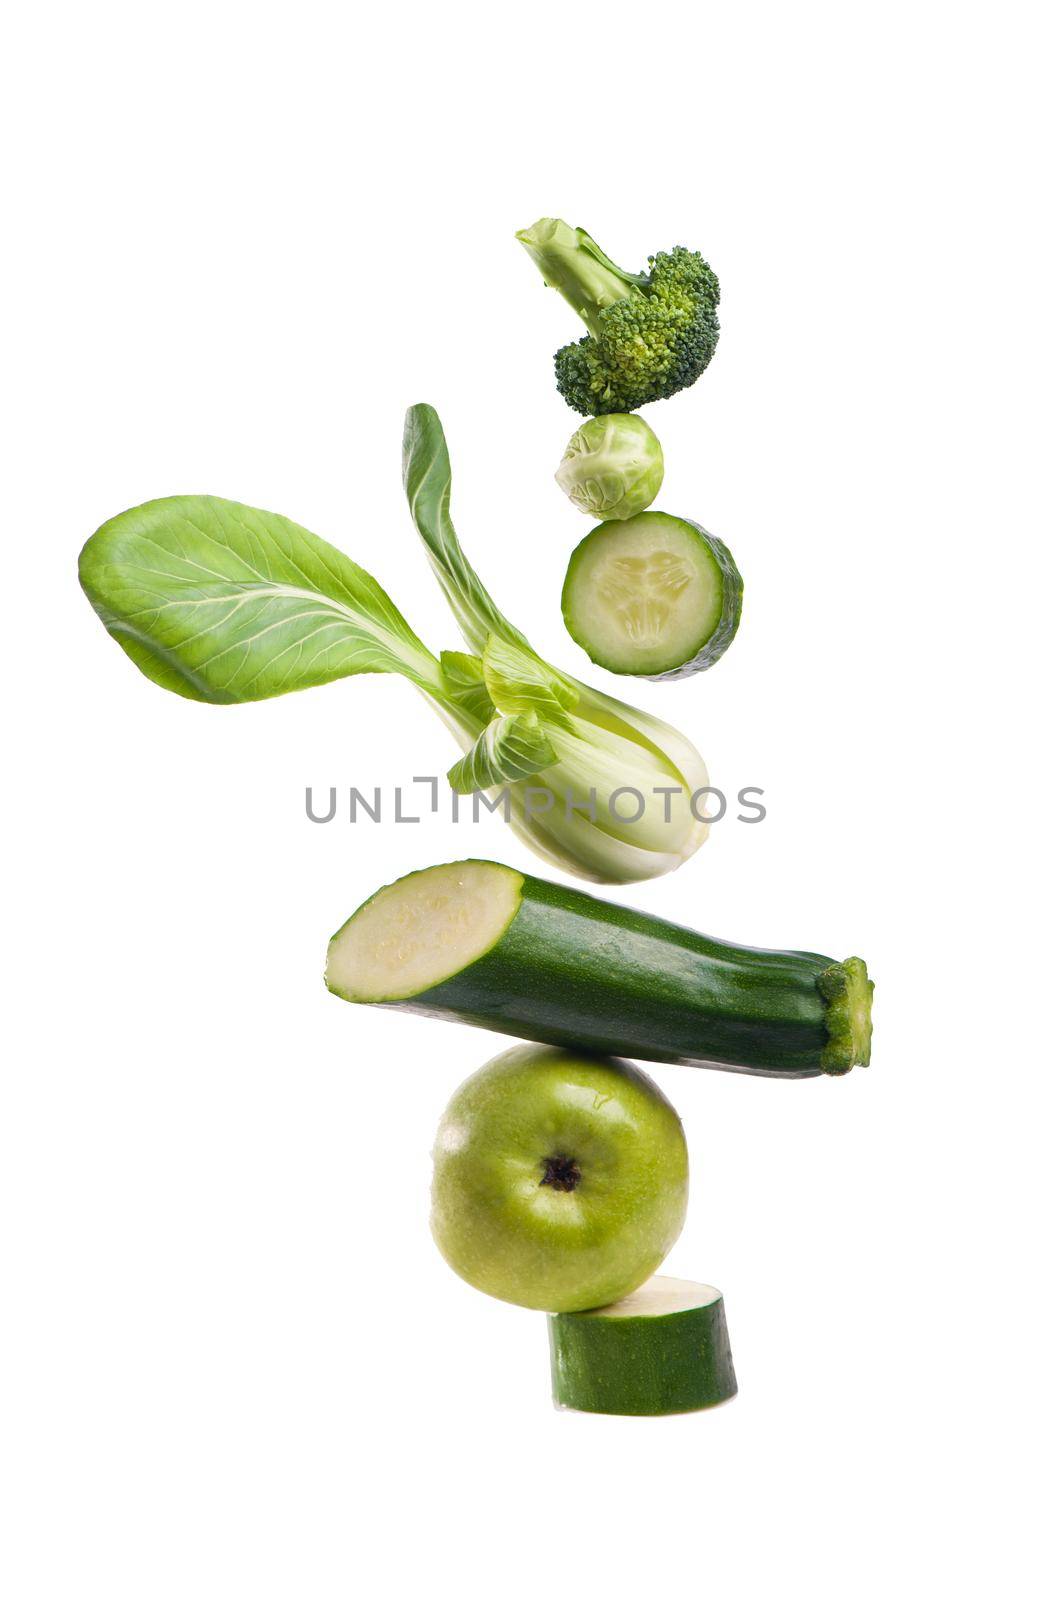 Group of green vegetables on white background by aprilphoto